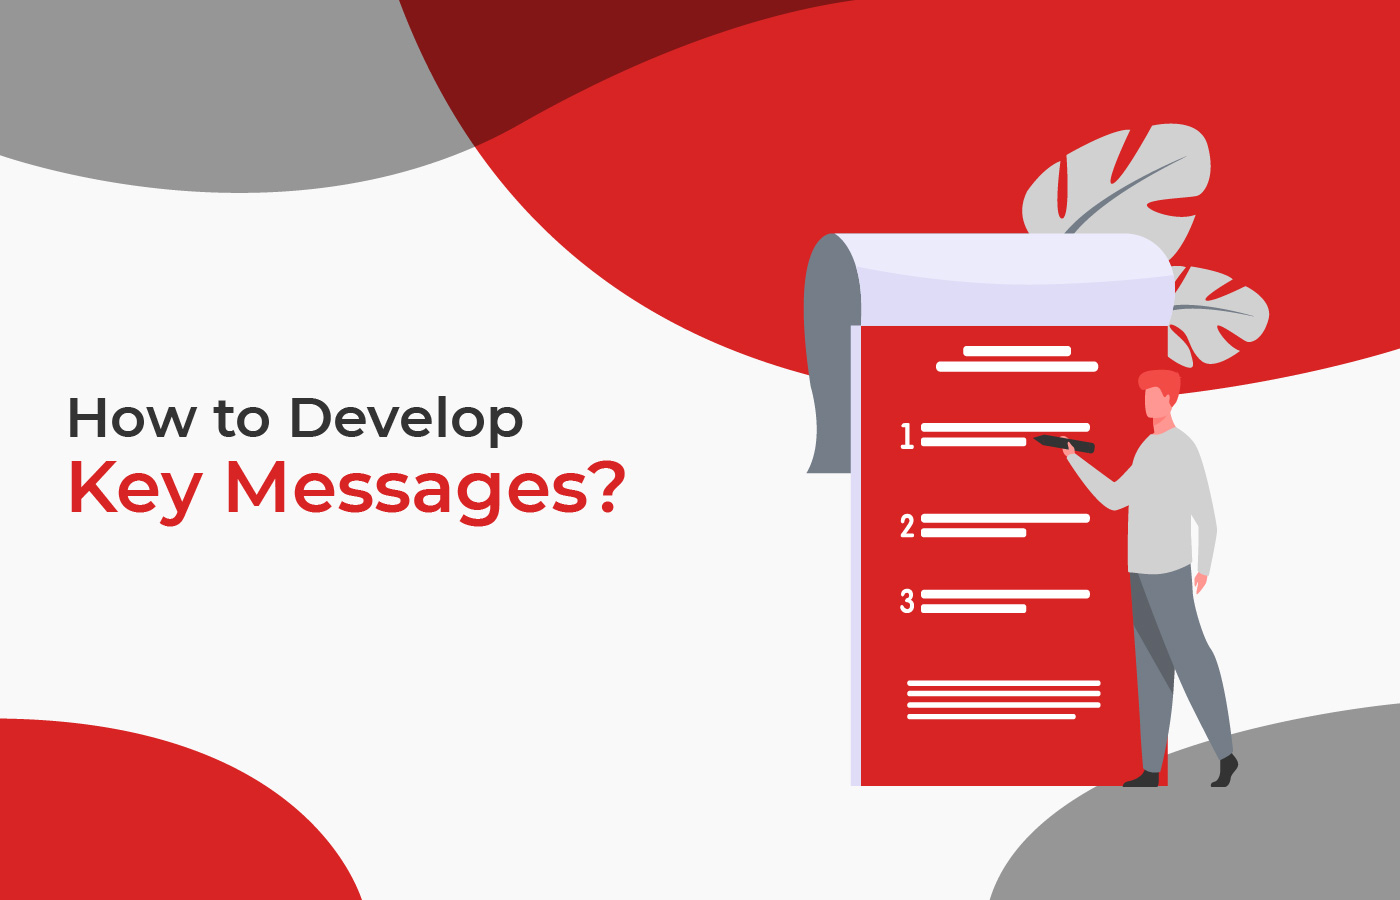 How to Develop Key Messages